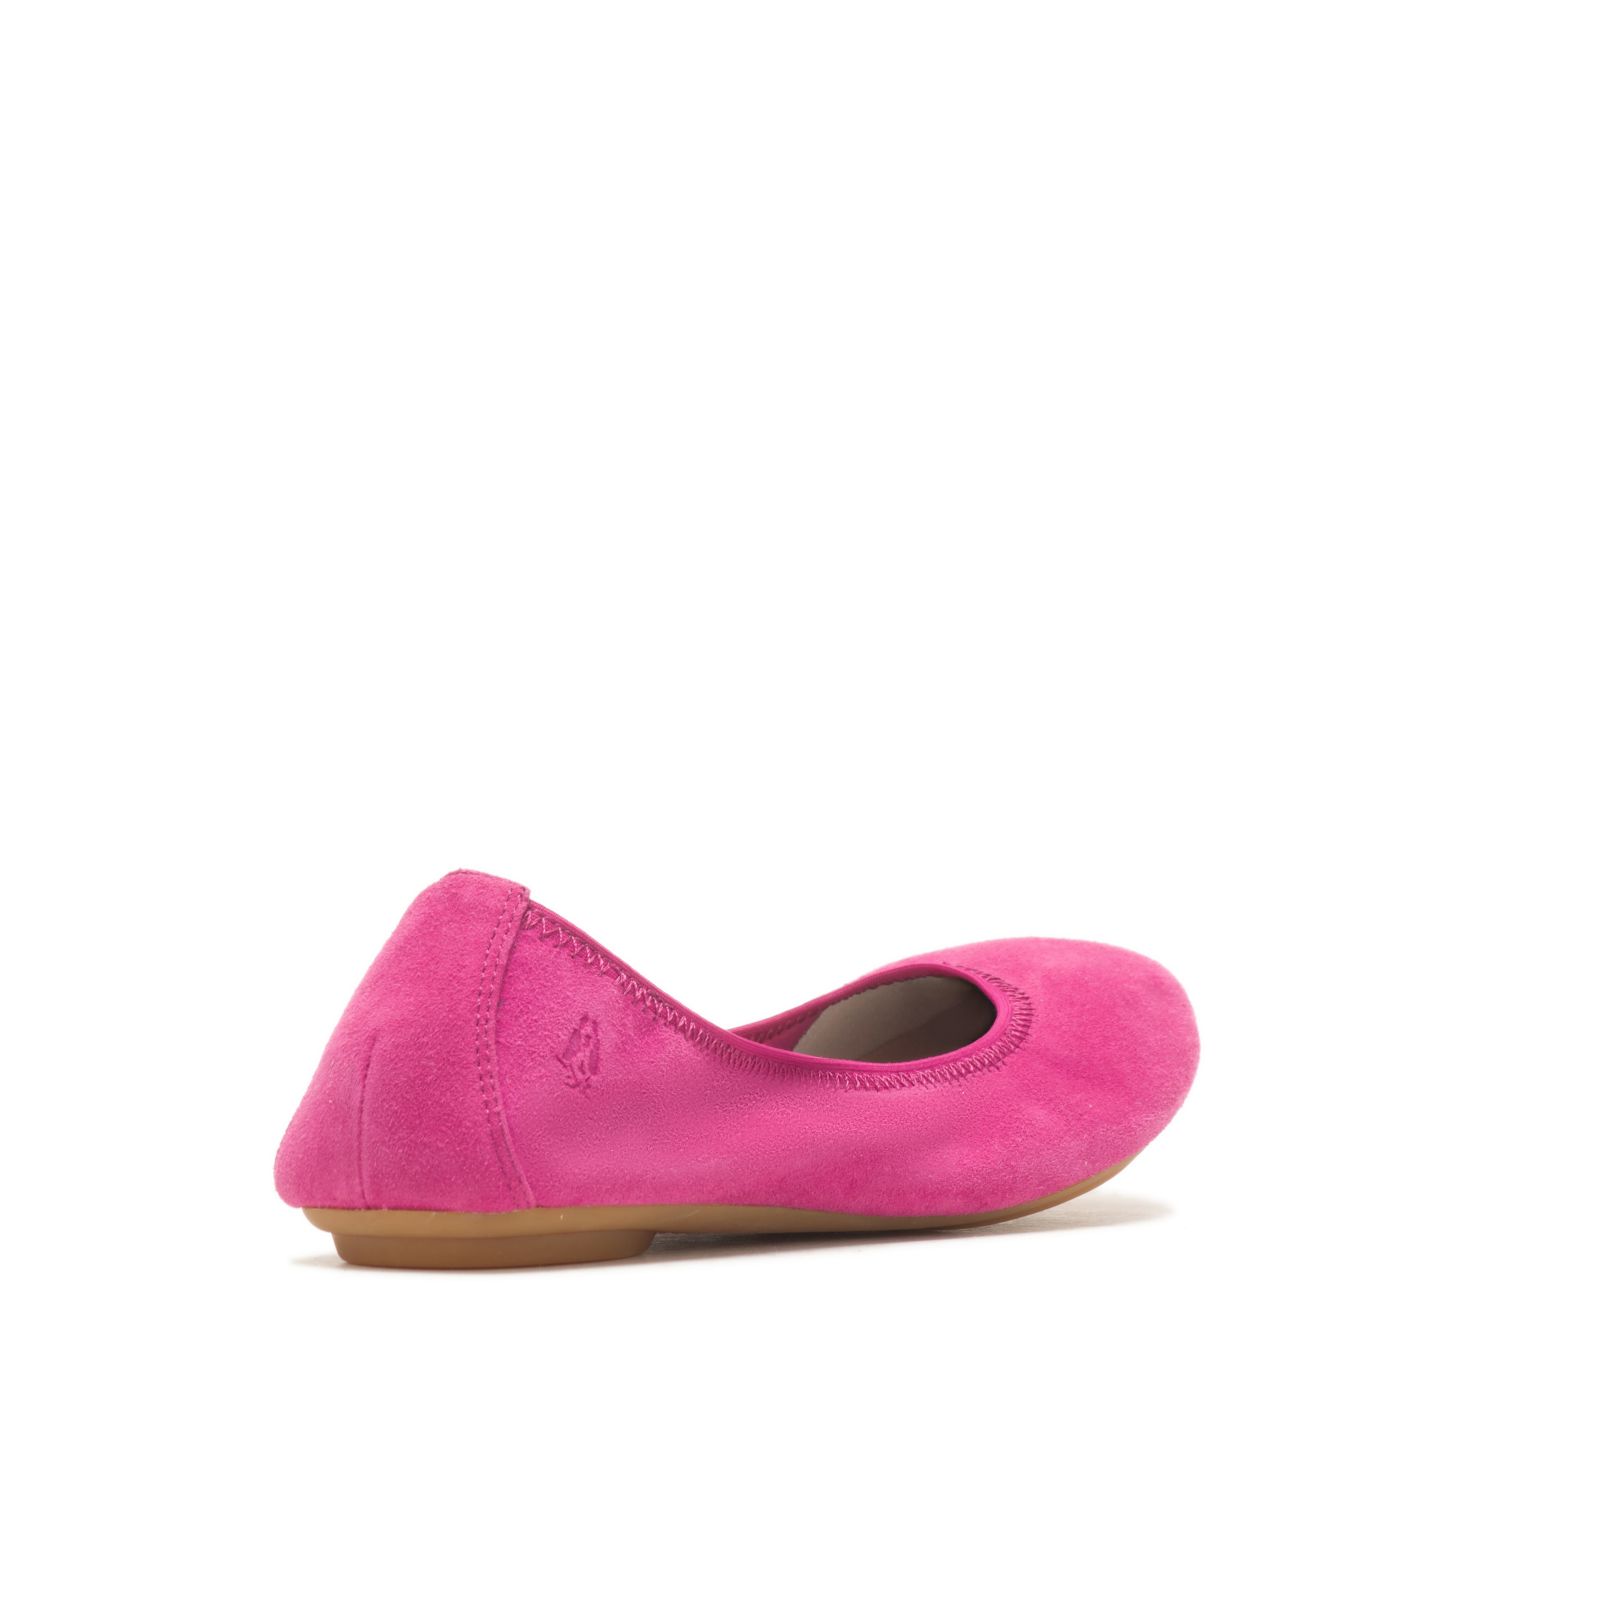 Tenis Planos Hush Puppies Chaste Ballet 2 Mujer Very Berry Suede | QOAVMHJ-95